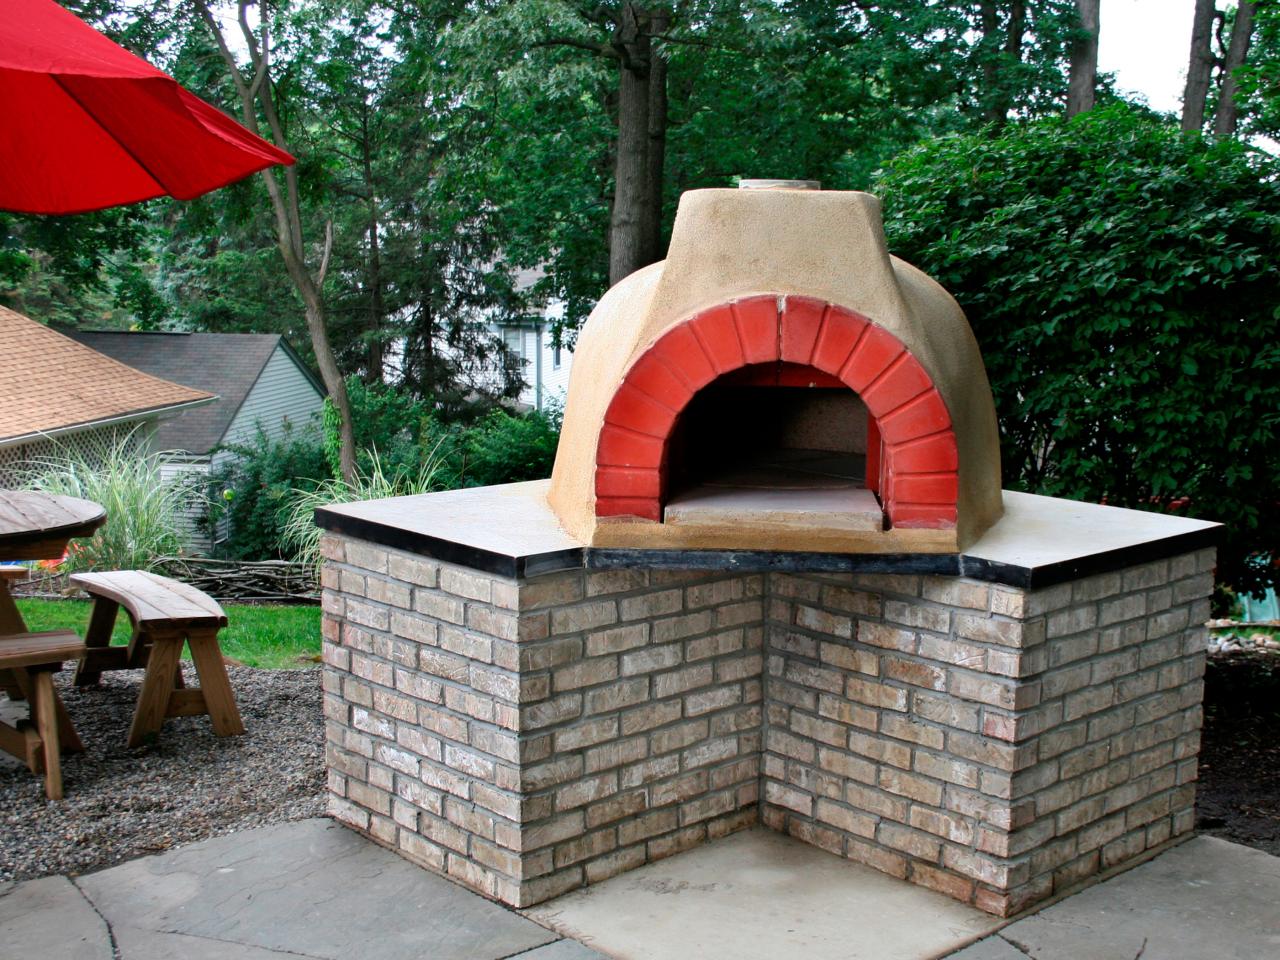 How To Build An Outdoor Pizza Oven, Homemade Outdoor Pizza Oven Plans